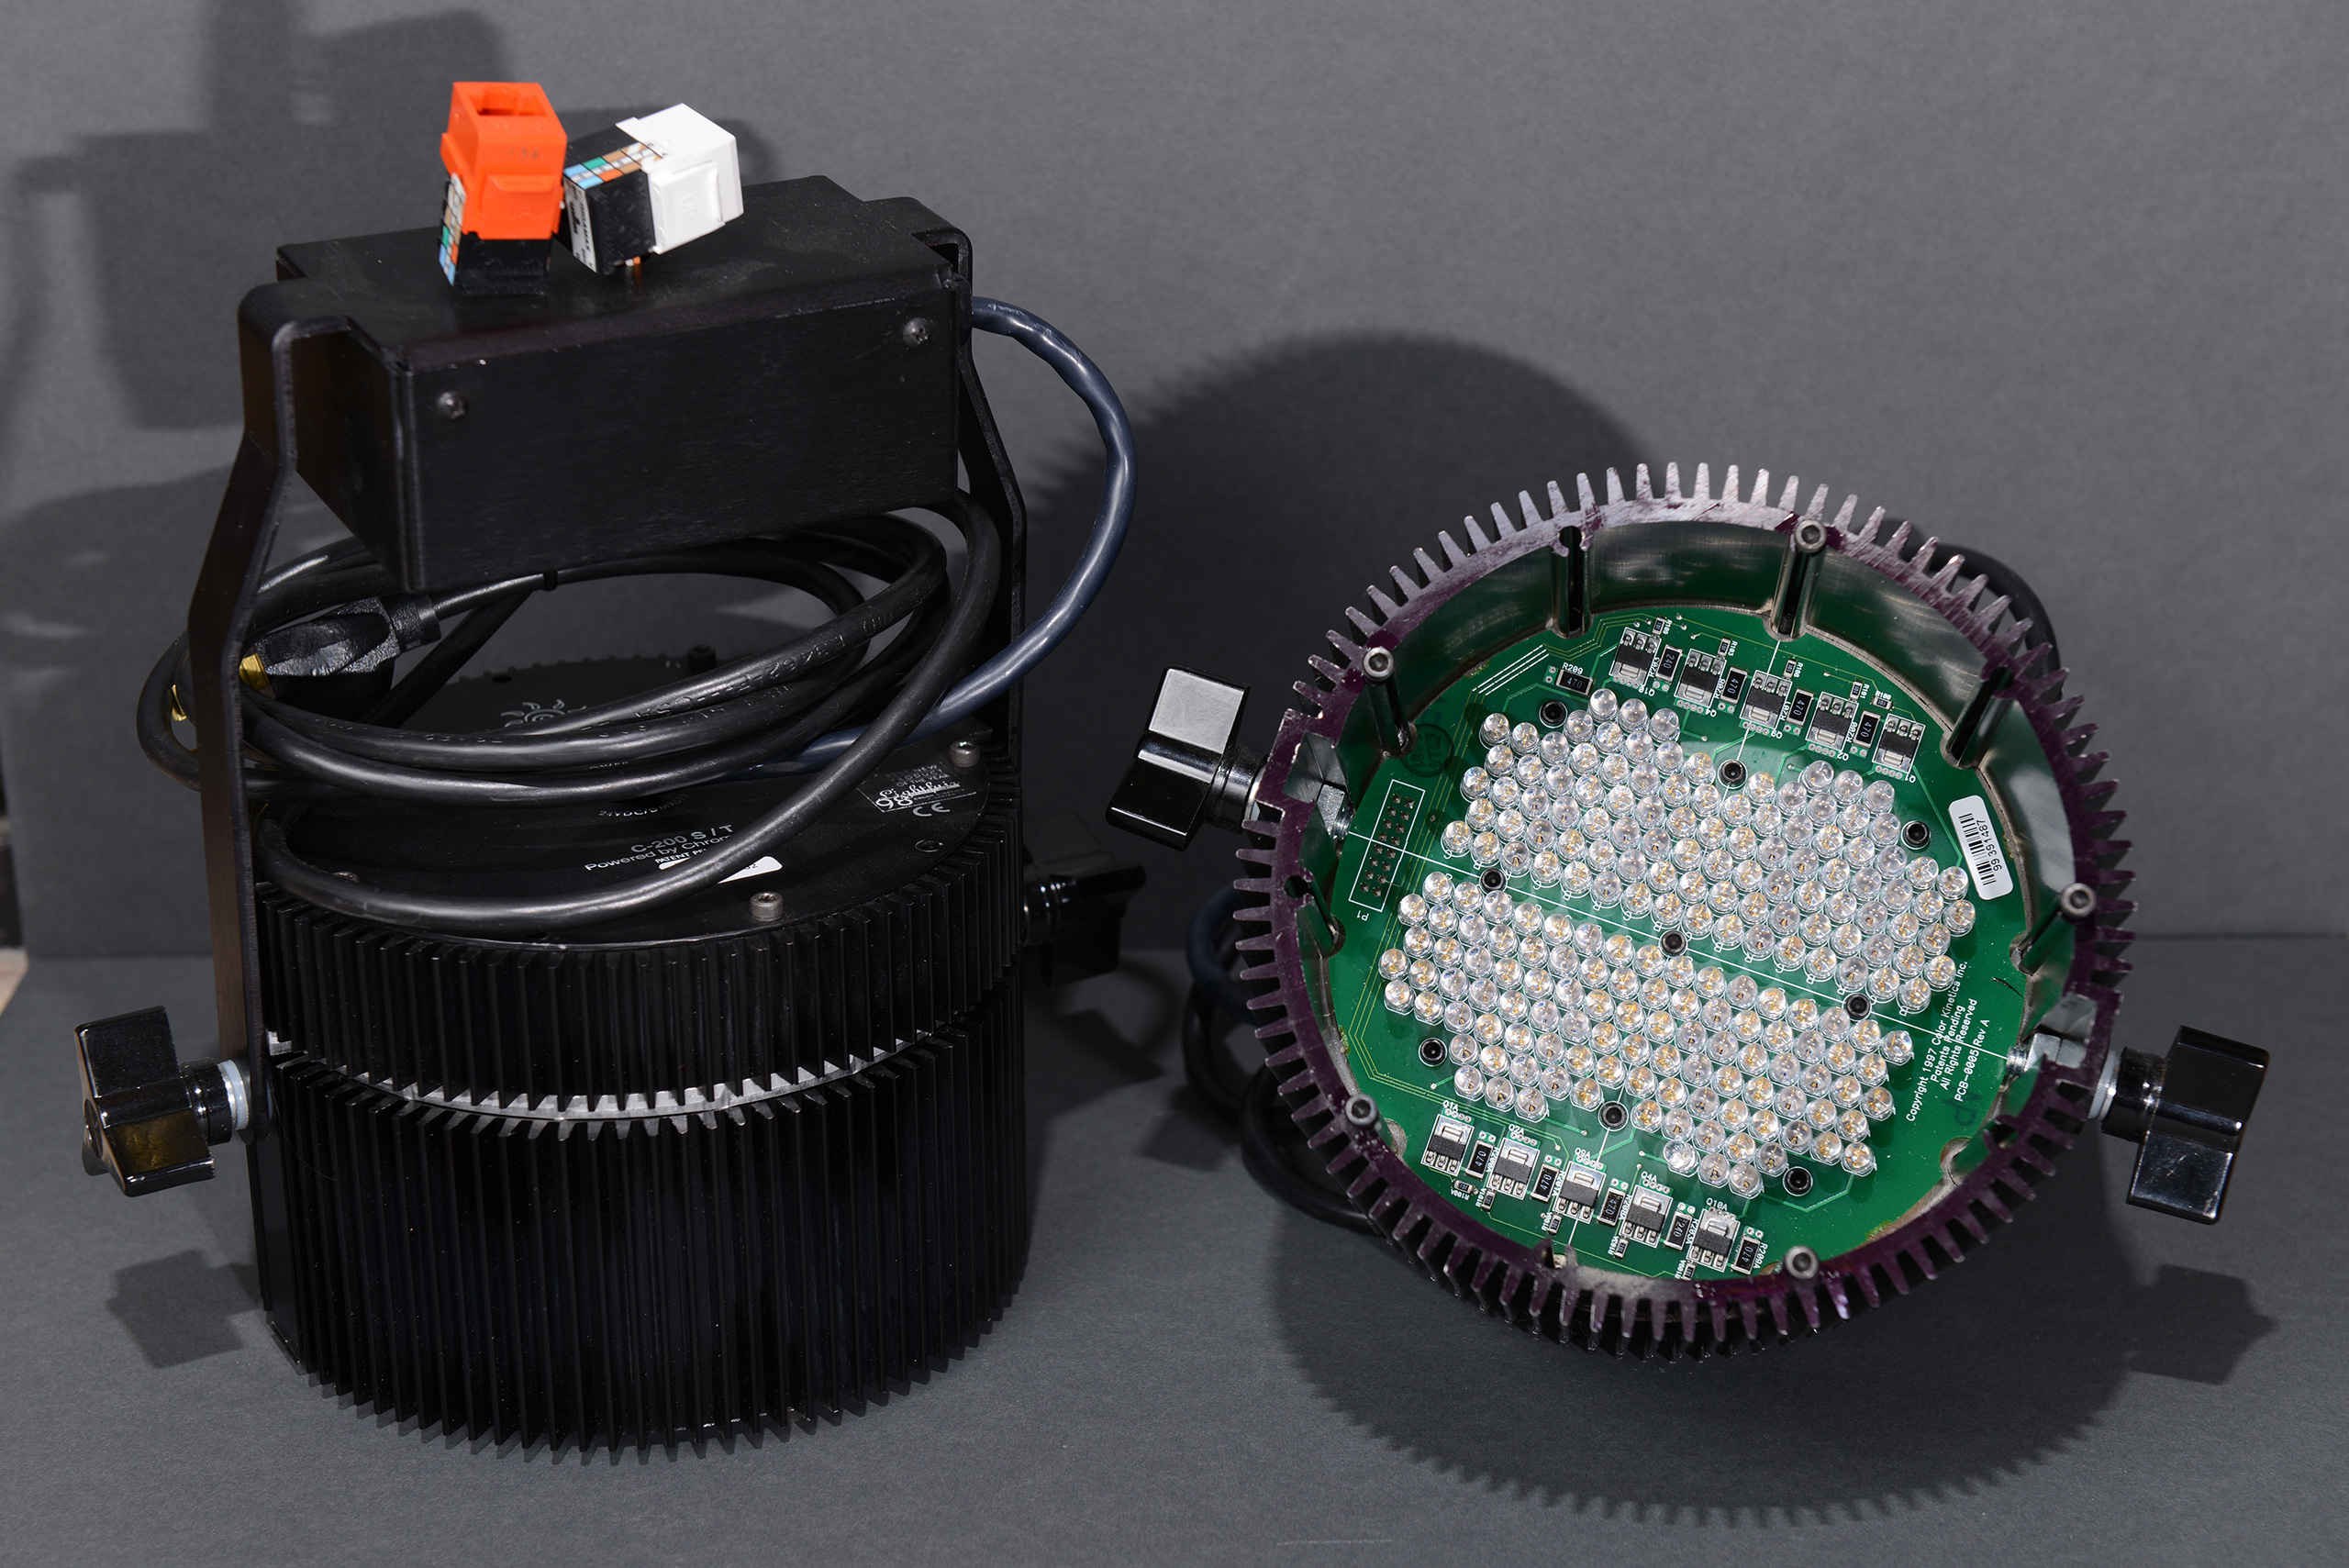 PoE-Powered RGB LED Floodlight | Photons, Electrons, and Dirt